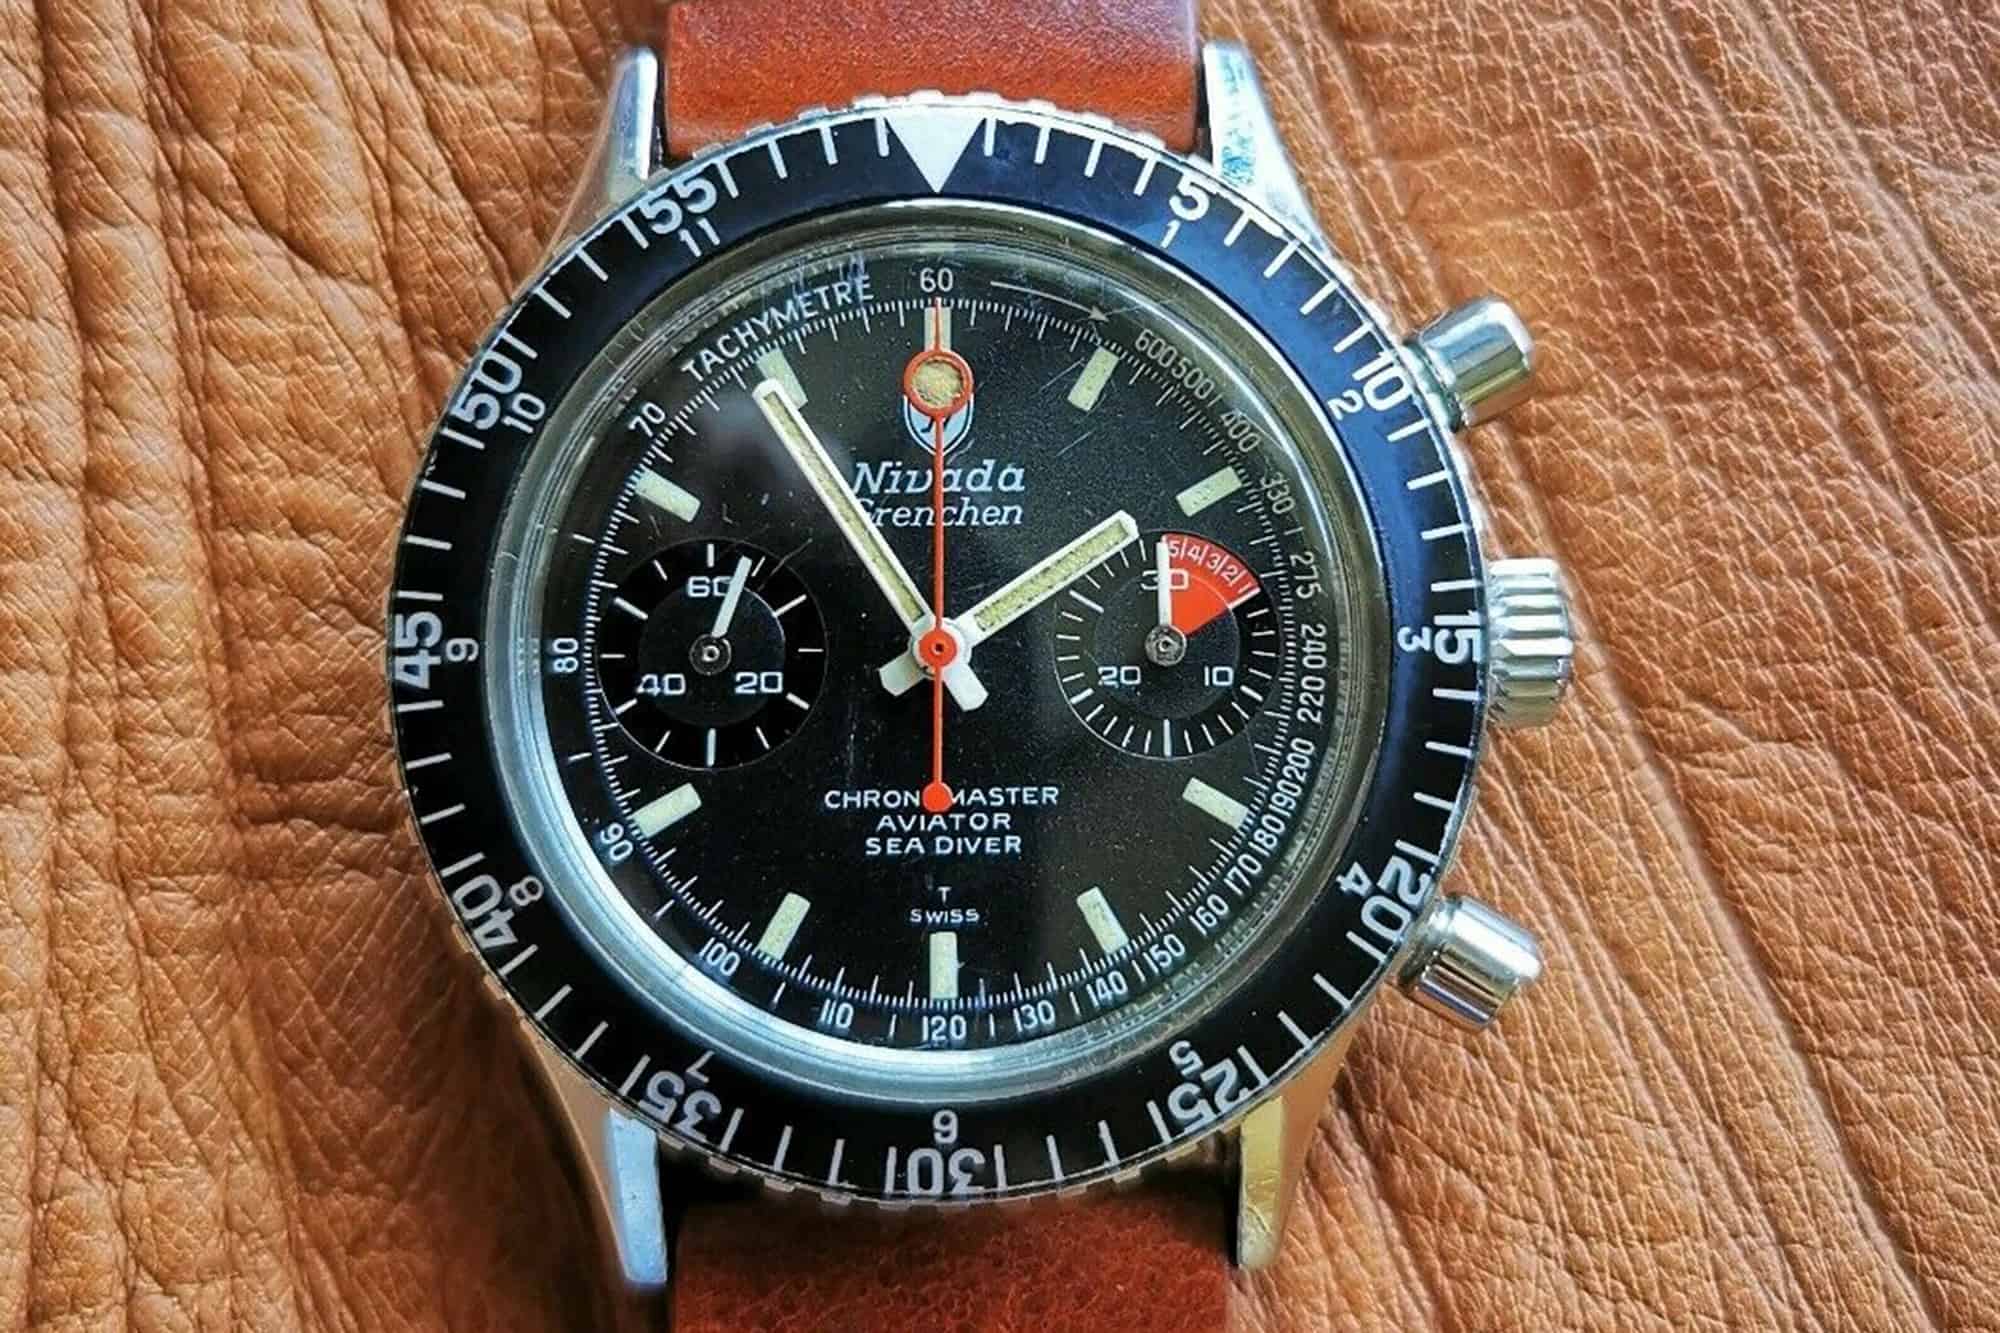 eBay Finds: Seiko Sportsmatic SilverWave “30 Proof” Diver, Nivada Grenchen Chronomaster Aviator Sea Diver Chronograph, and More